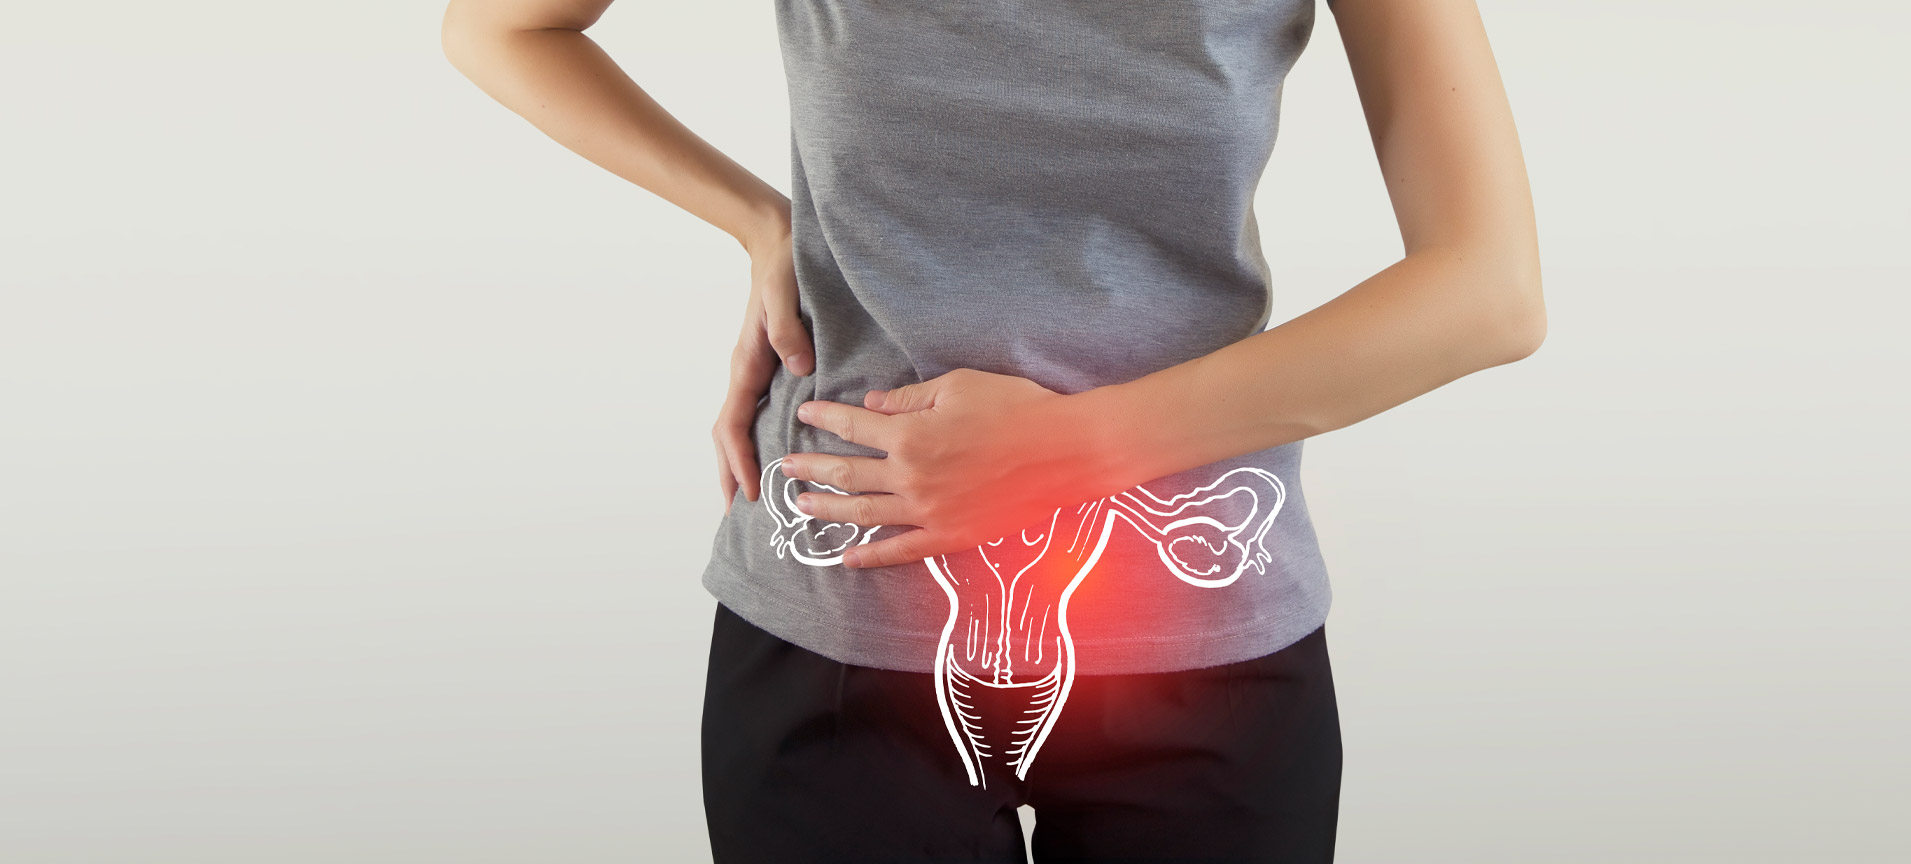 8 Gynecological Conditions That Can Cause Pelvic Pain-198a7b2b